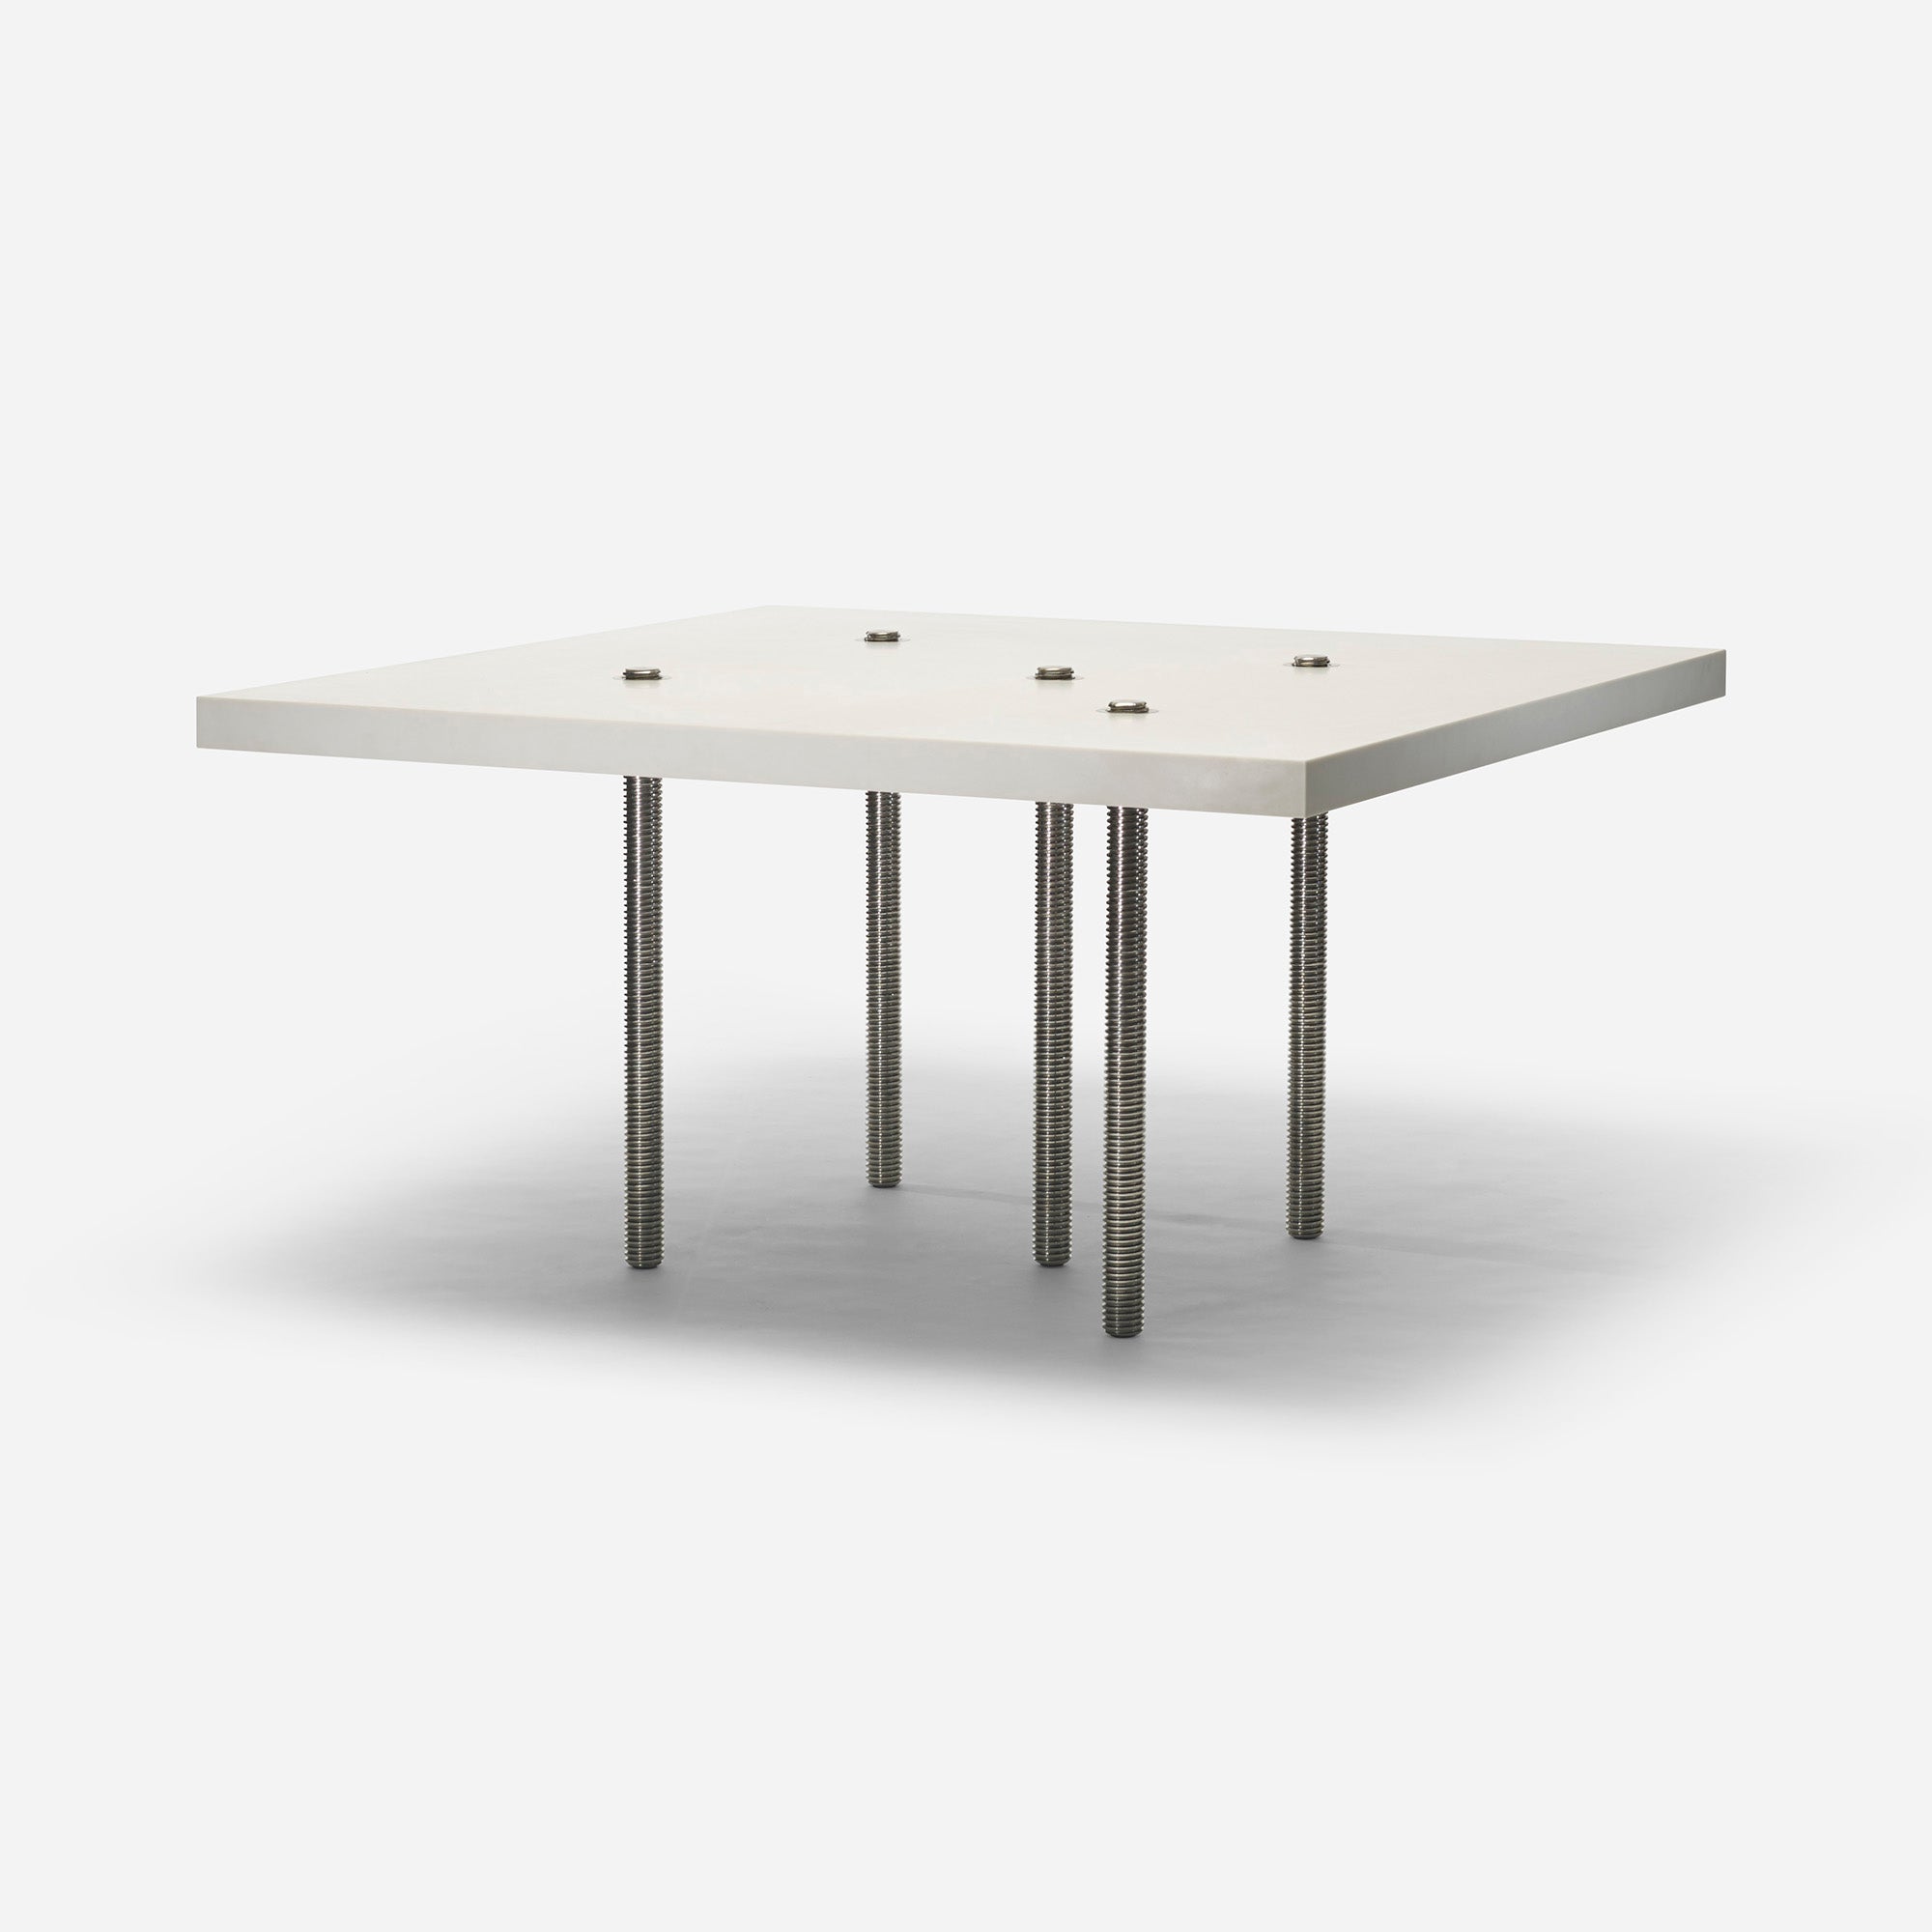 P.P.C. table by Martin Szekely